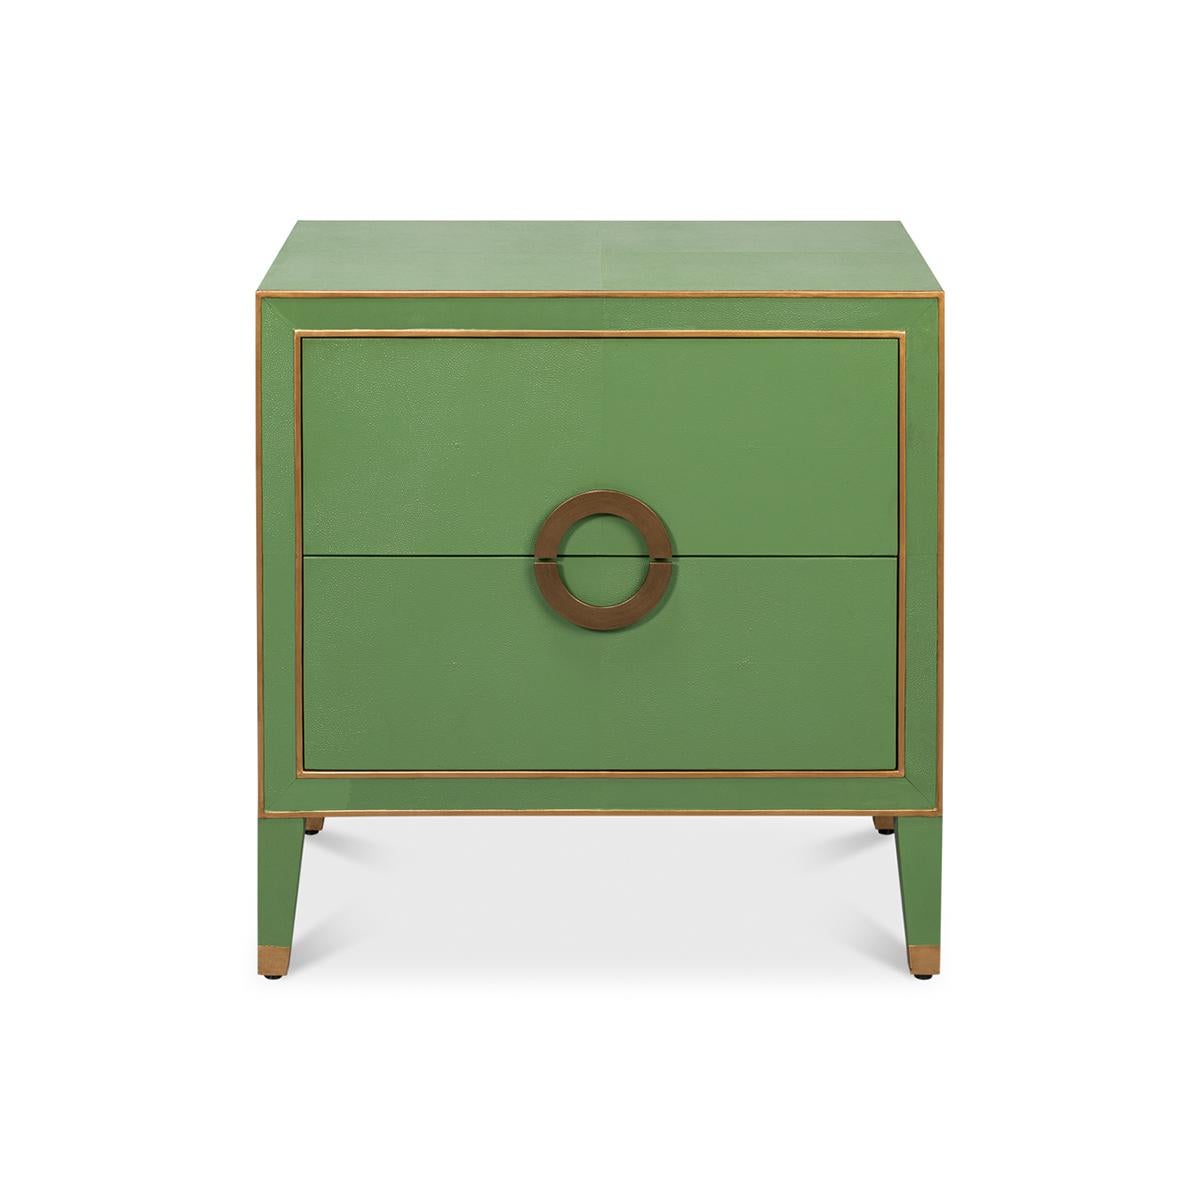 This piece combines functionality with unparalleled style, creating a statement of transitional elegance.

The standout feature of this nightstand is the rich, vibrant green hue that perfectly contrasts with the elegant golden accents, bringing a